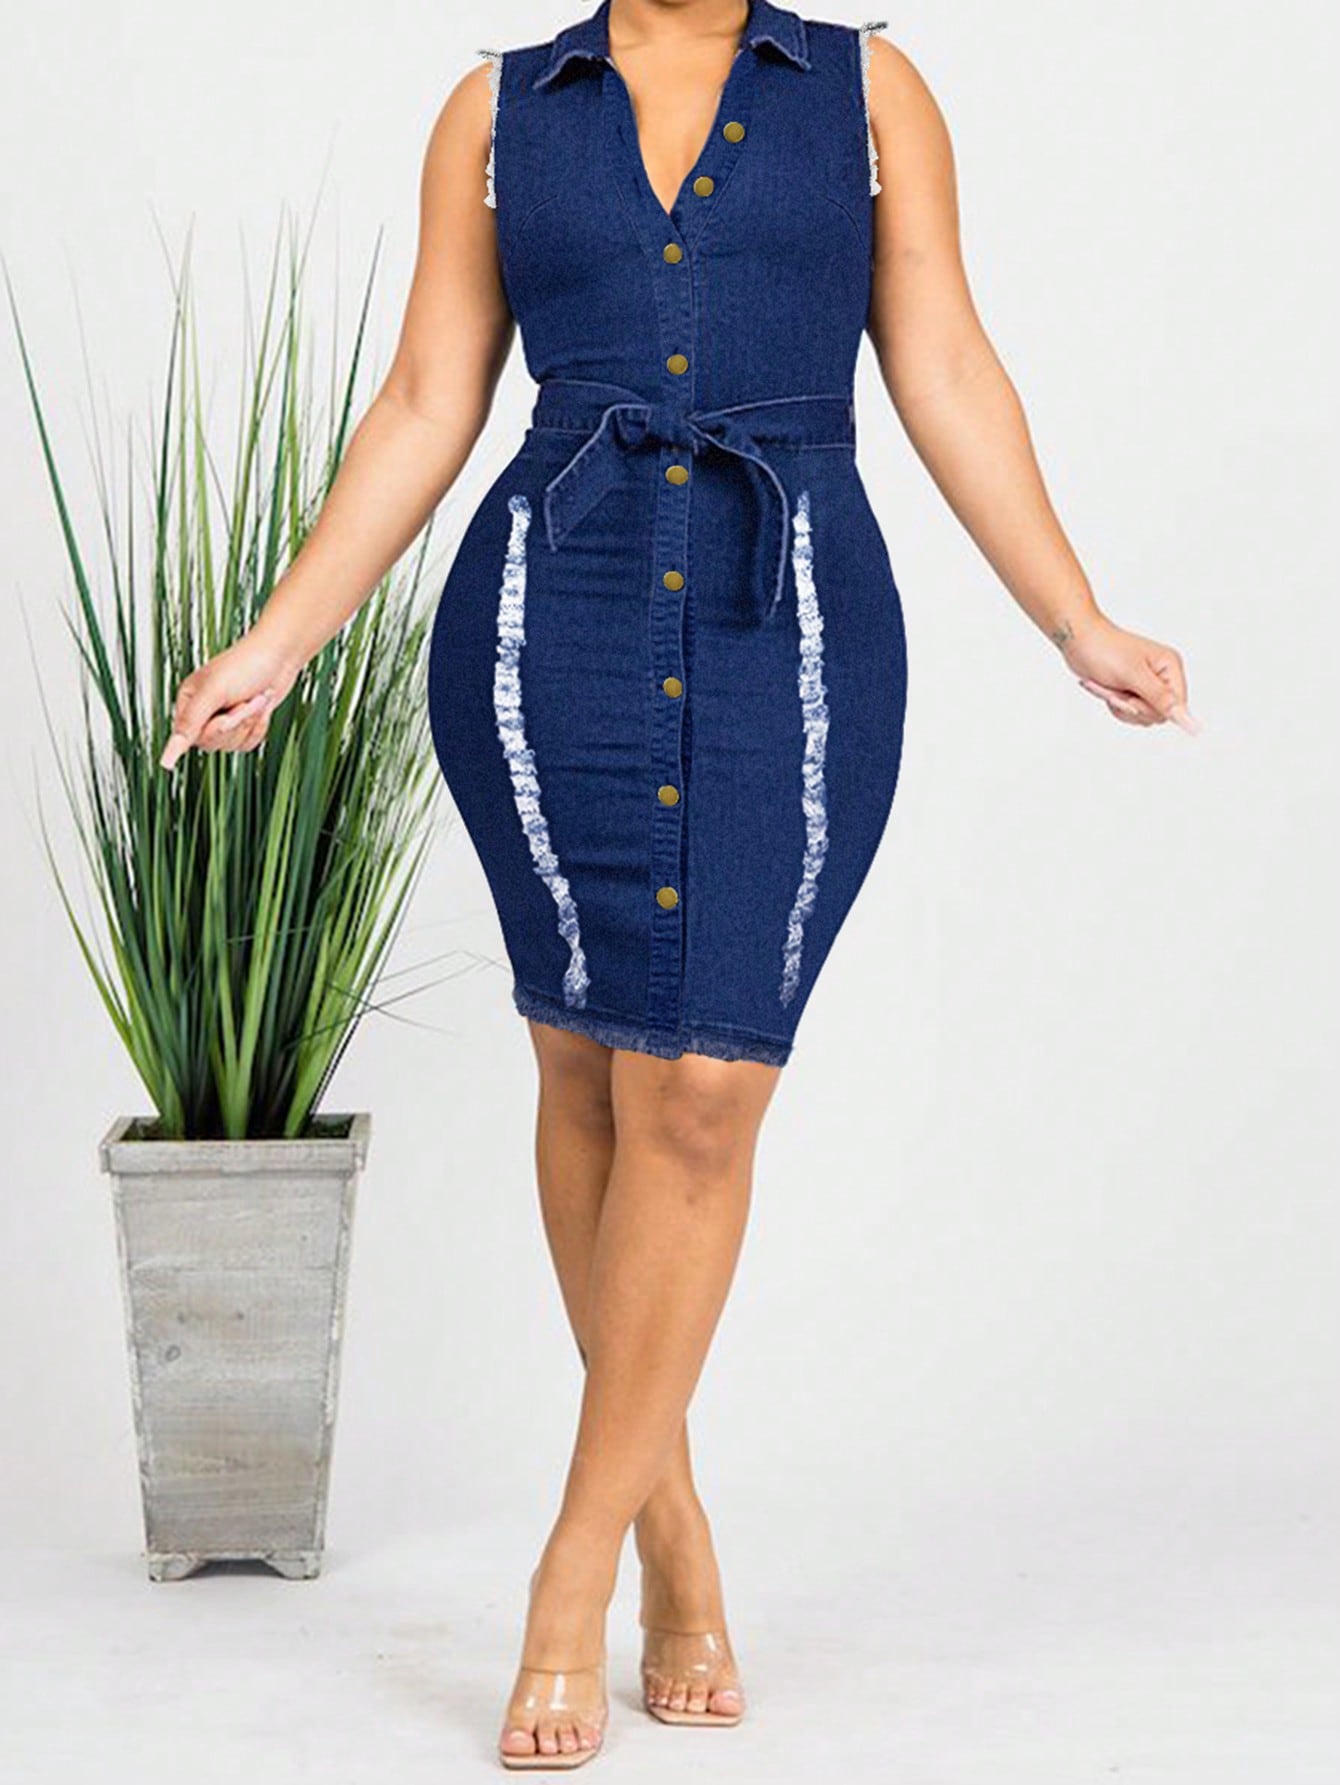 Chic and Trendy: Button Front Belted Denim Dress for Effortless